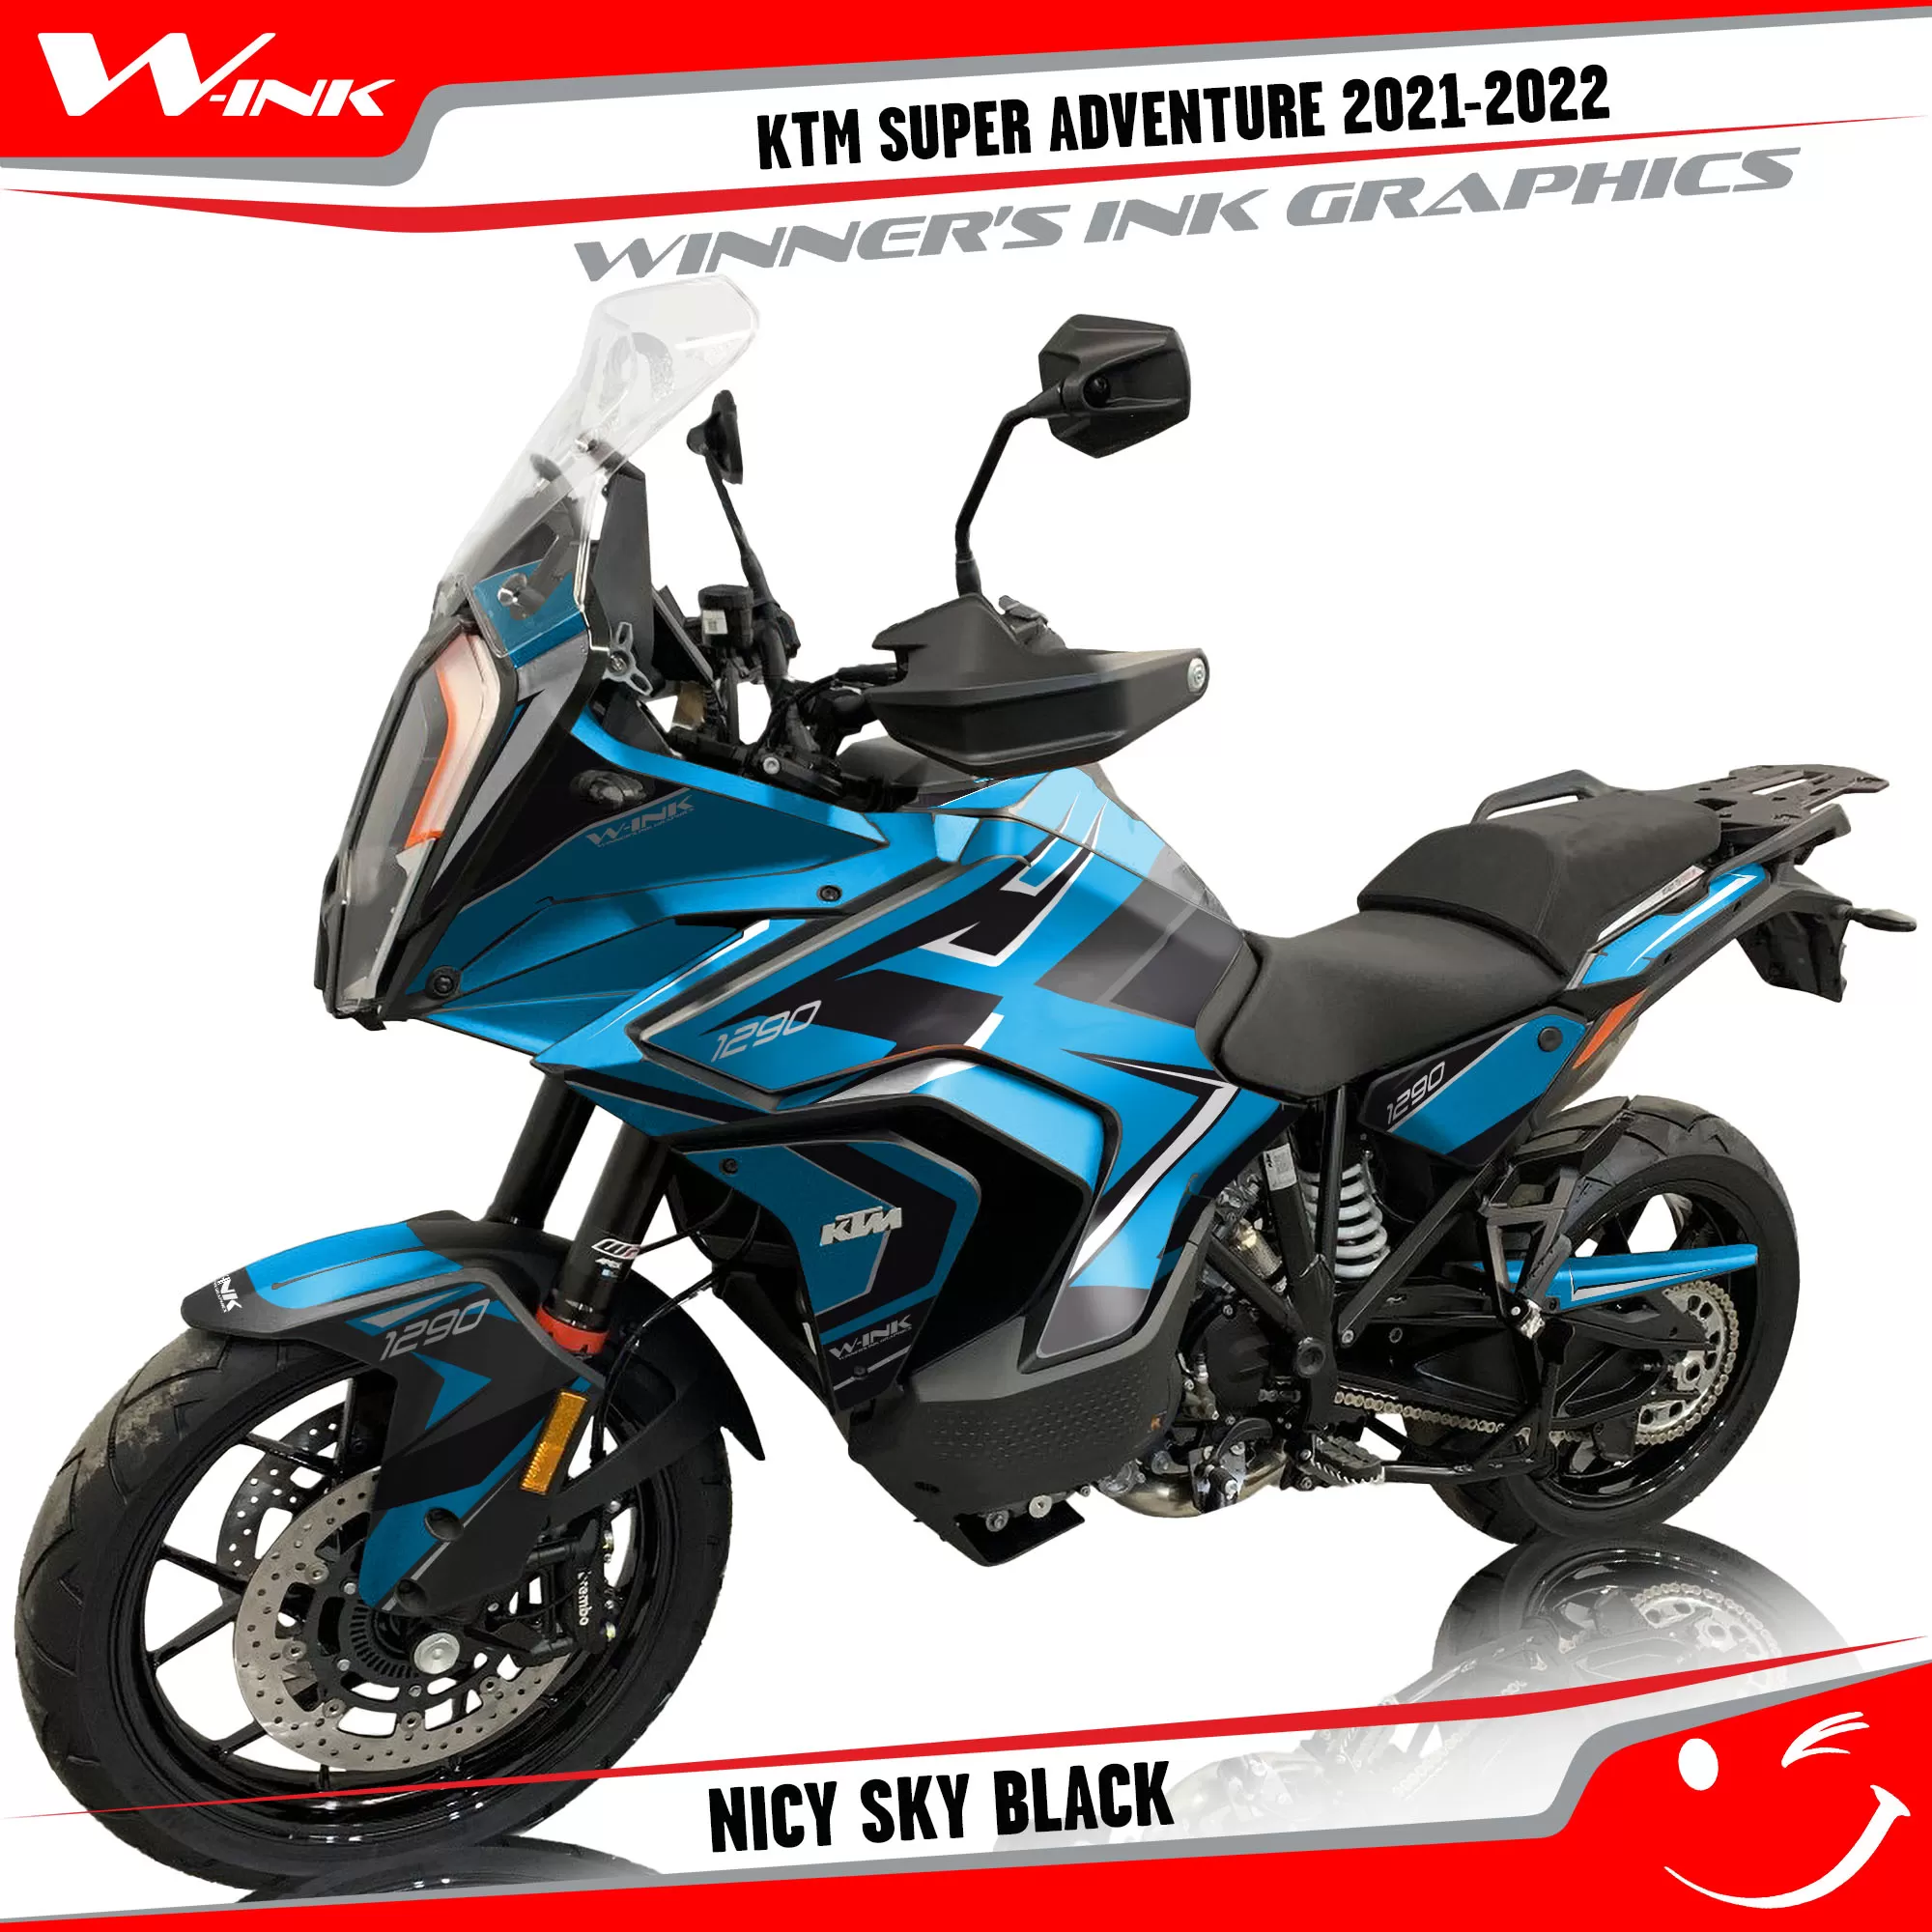 KTM-Super-Adventure-S-2021-2022-graphics-kit-and-decals-with-designs-Nicy-Sky-Black